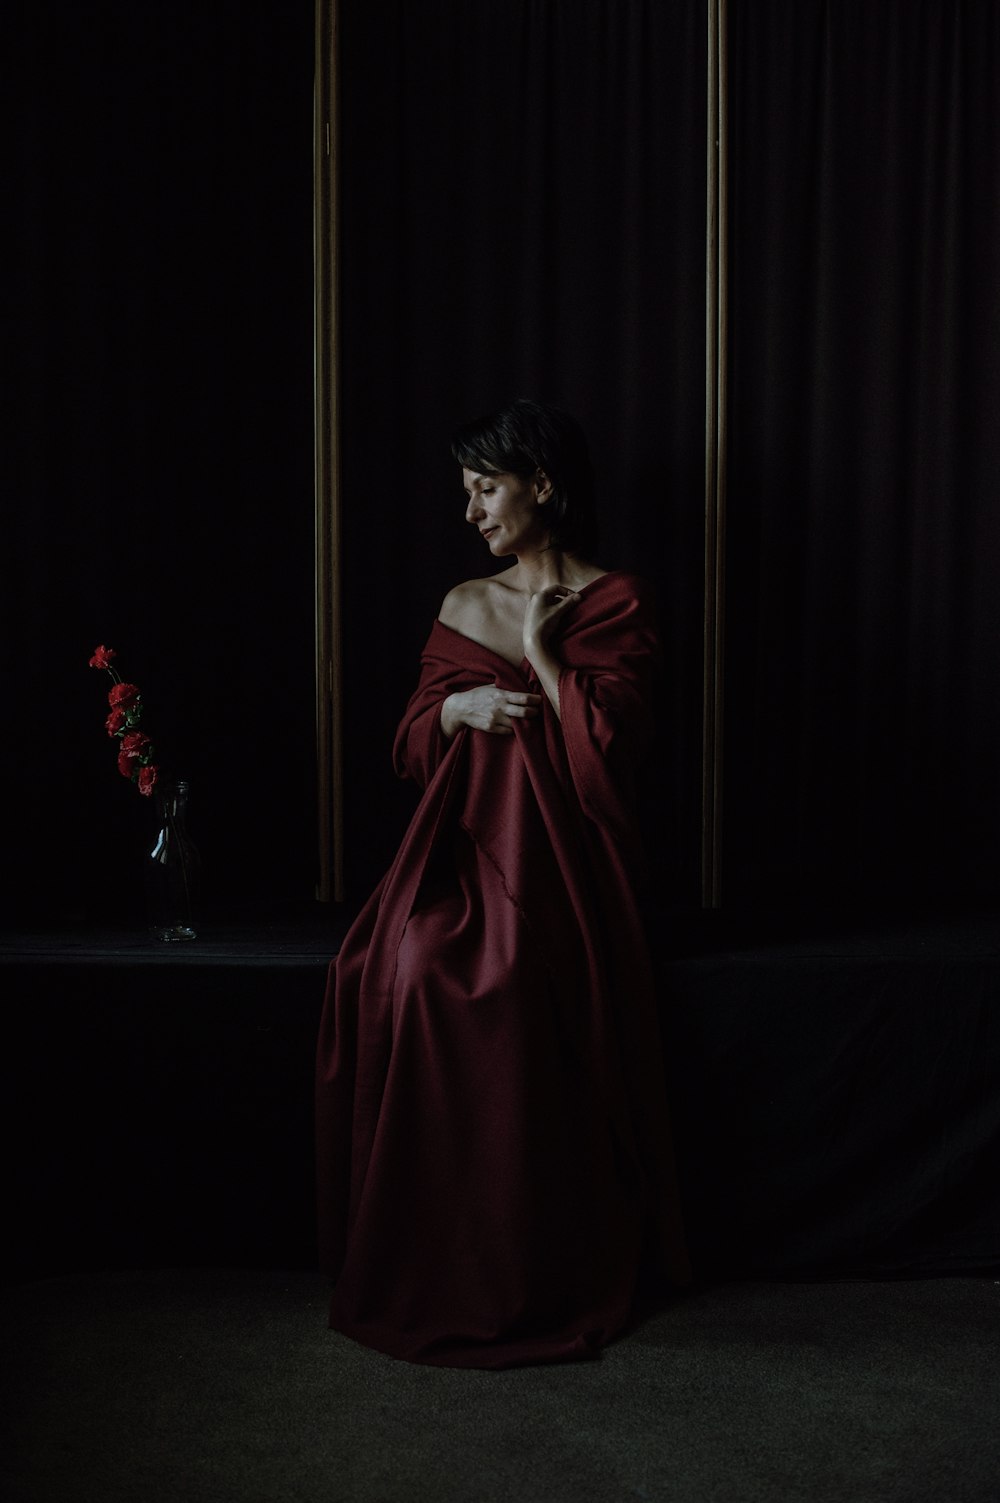 a woman in a red dress standing in a dark room